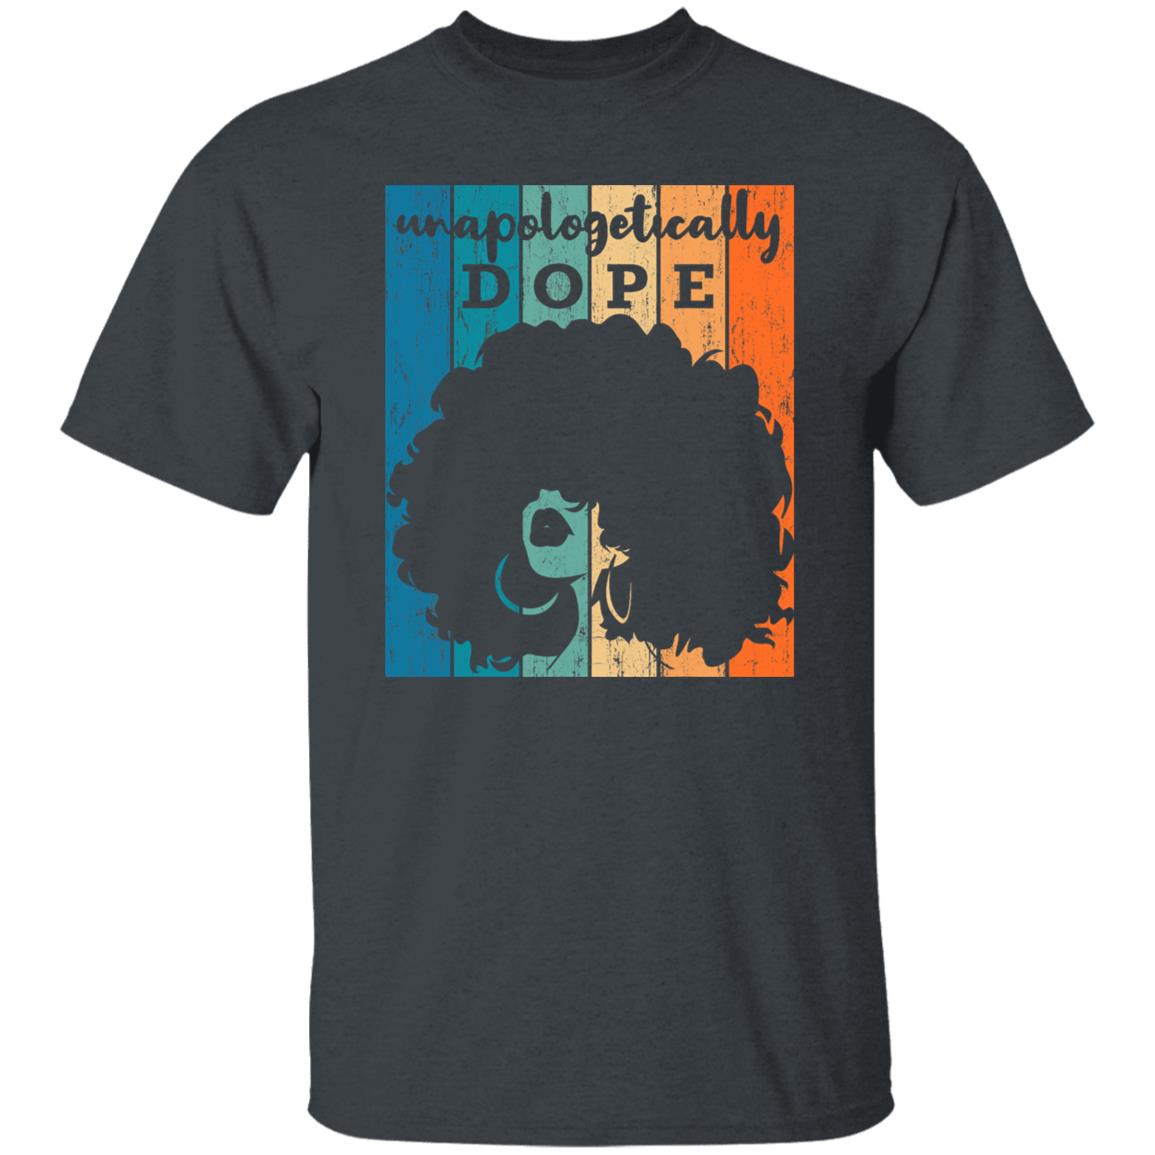 Unapologetically Dope Black History Month African American Tee Shirt